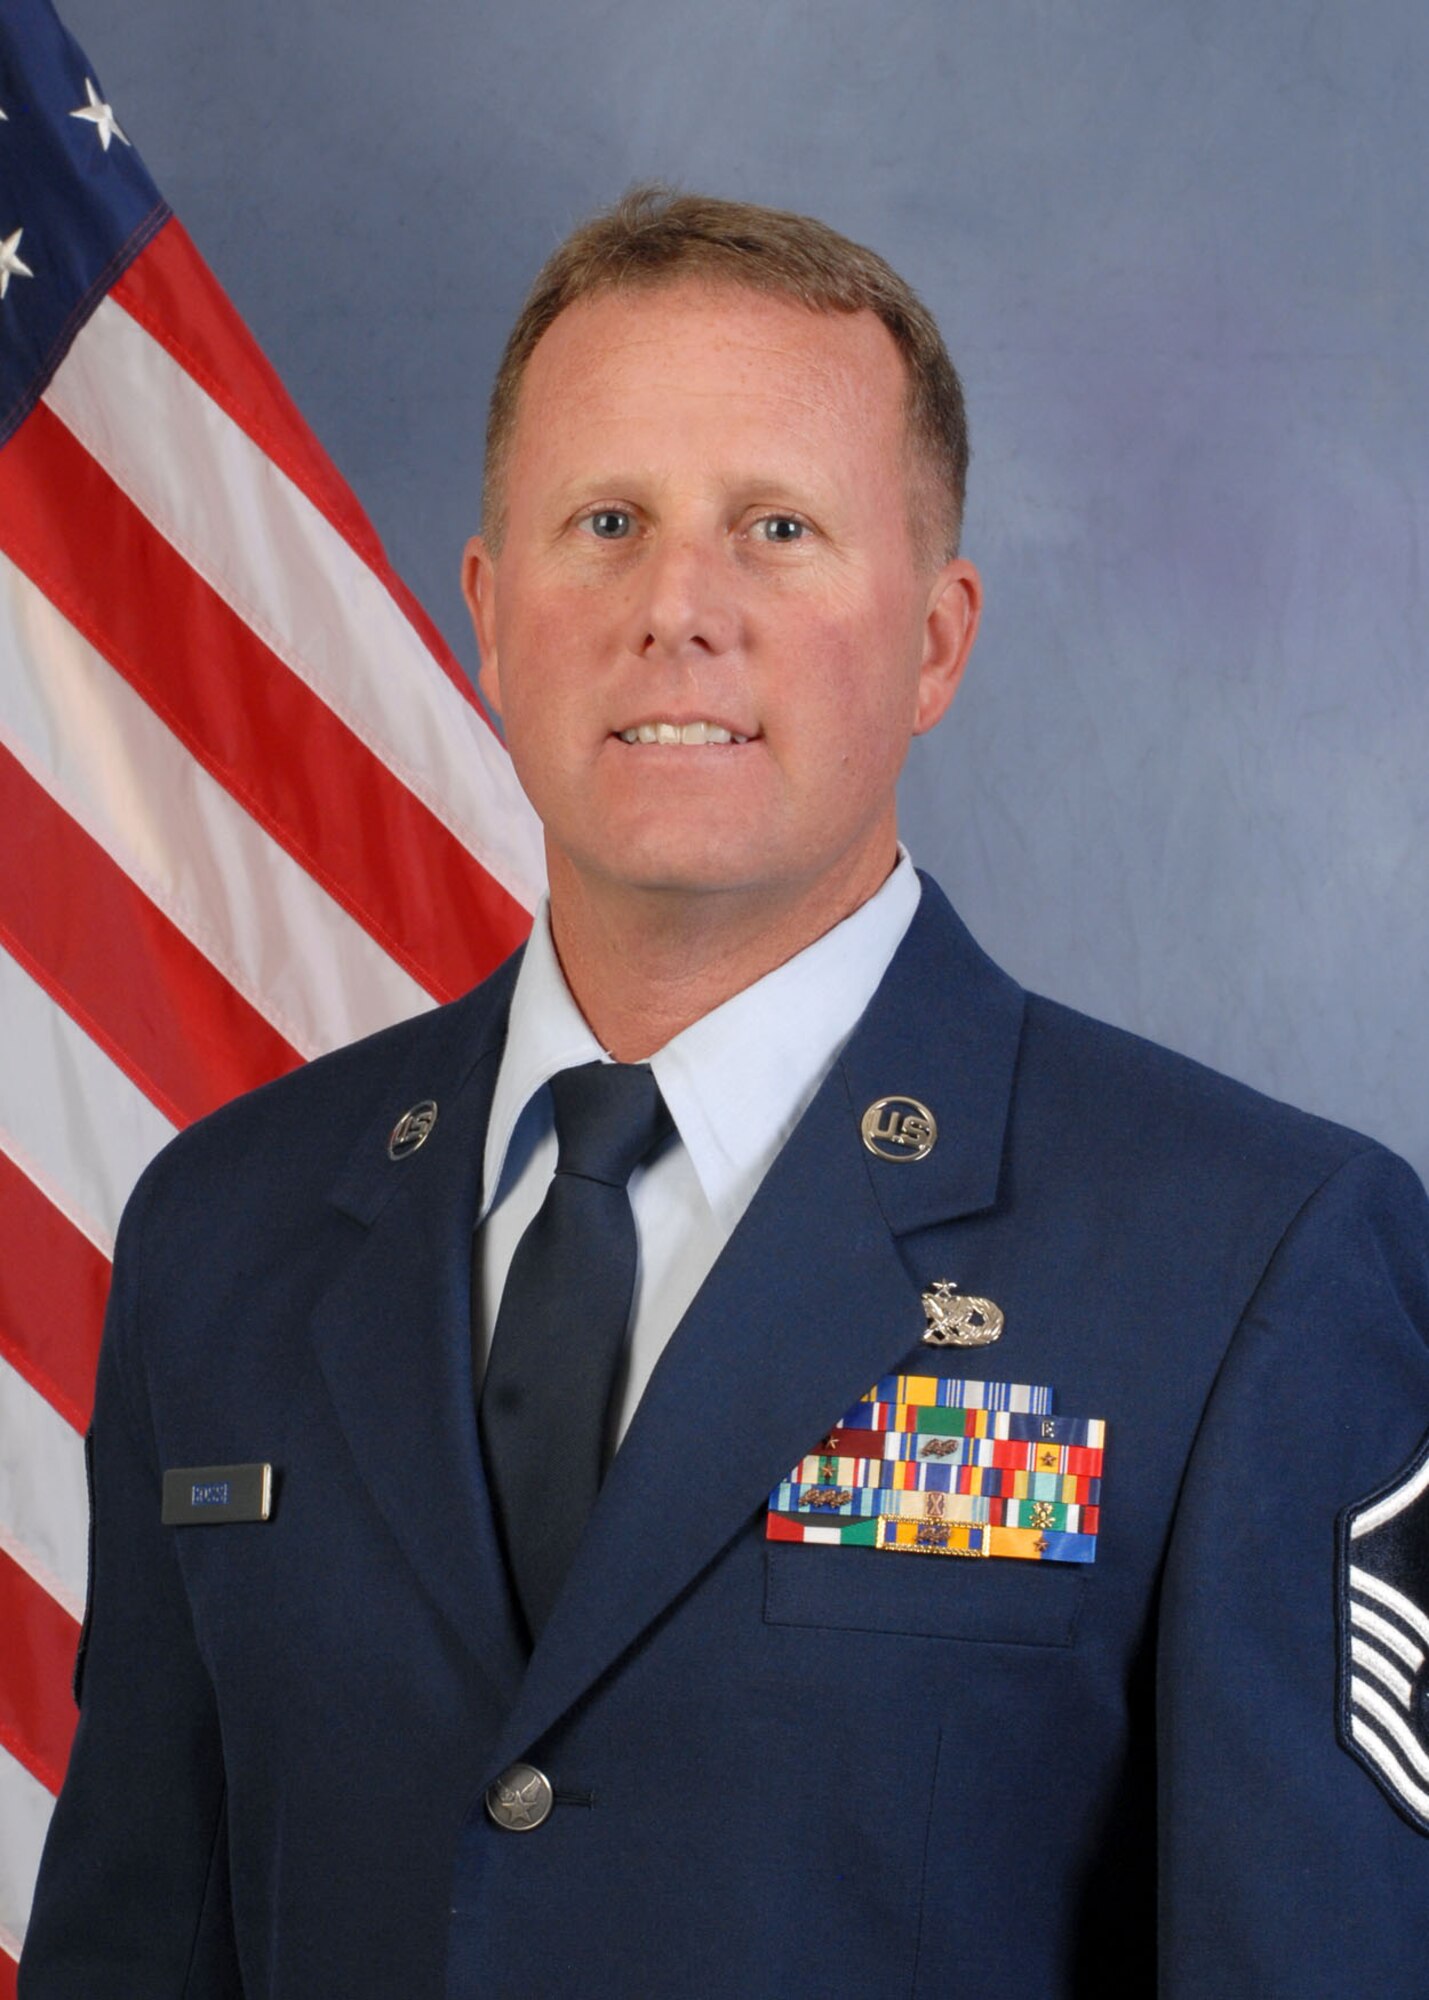 Bosse distinguished himself as an exemplary leader during Kingsley Field’s 2015 training exercise in Tucson, Ariz. His avionics and First Sergeant expertise helped attain a 98.75-percent maintenance effectiveness rate. Bosse’s exceptional leadership shone through during the training exercise when a maintenance issue on a transport aircraft left 45 members stranded; he responded by  procuring transportation, lodging, and meals ensuring every Airman was taken care of.

He is willing to step up when needed; Bosse filled the roll of First Sergeant for both the maintenance group and logistics readiness squadron during a temporary duty yonder. Bosse is a leader in the community, helping lead youth sports programs. He is a go-to advisor for pulse of the personnel and his peer trust ensures they share issues with him to achieve resolution.
